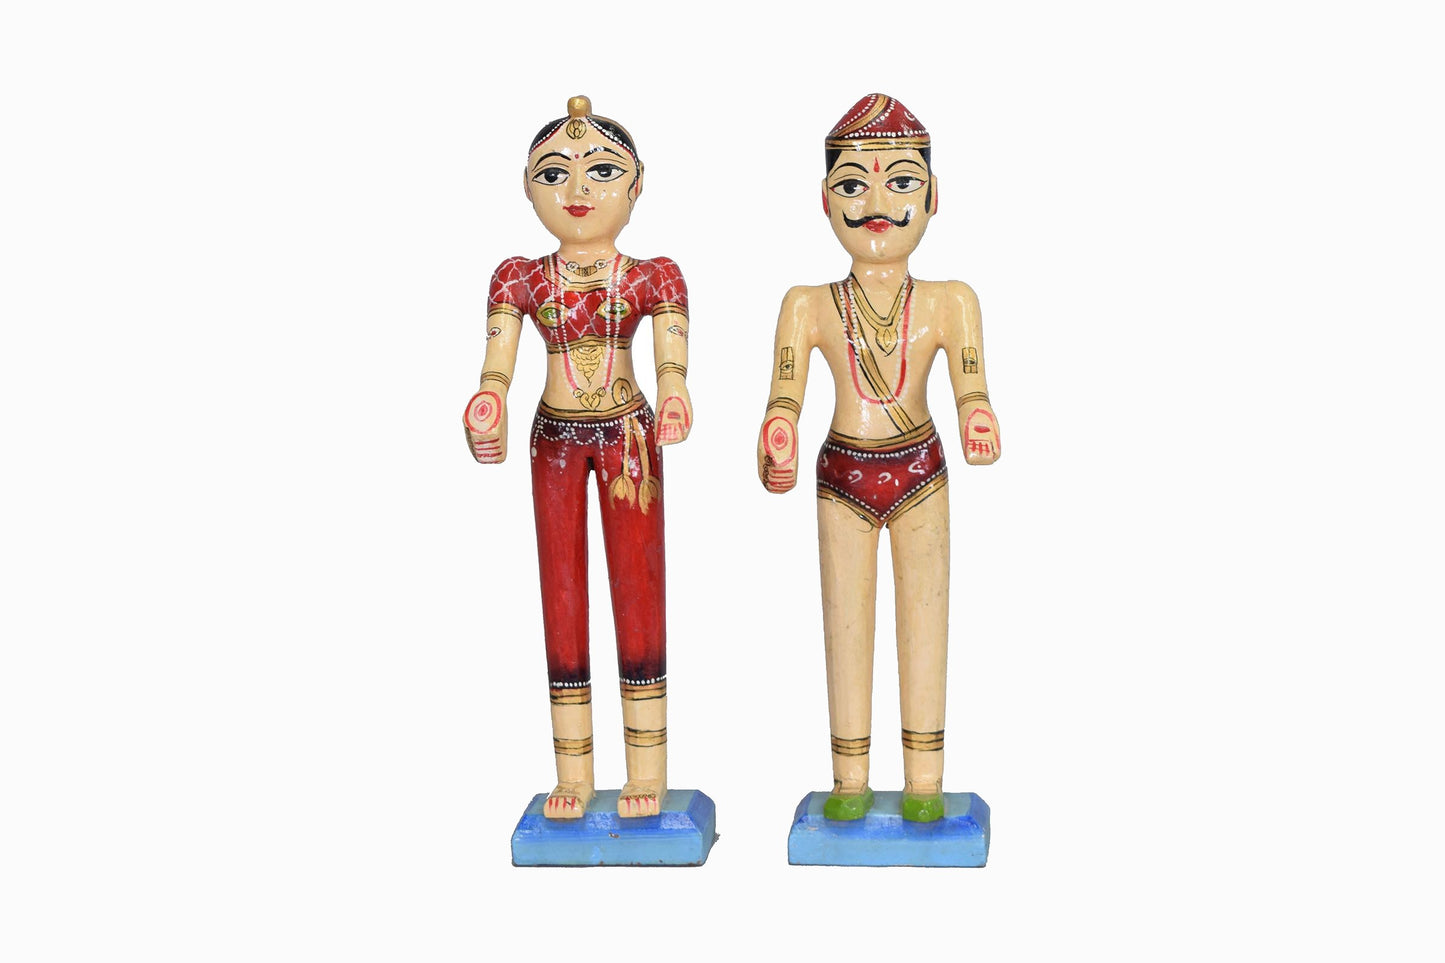 Pair of wooden Indian figurines (red)